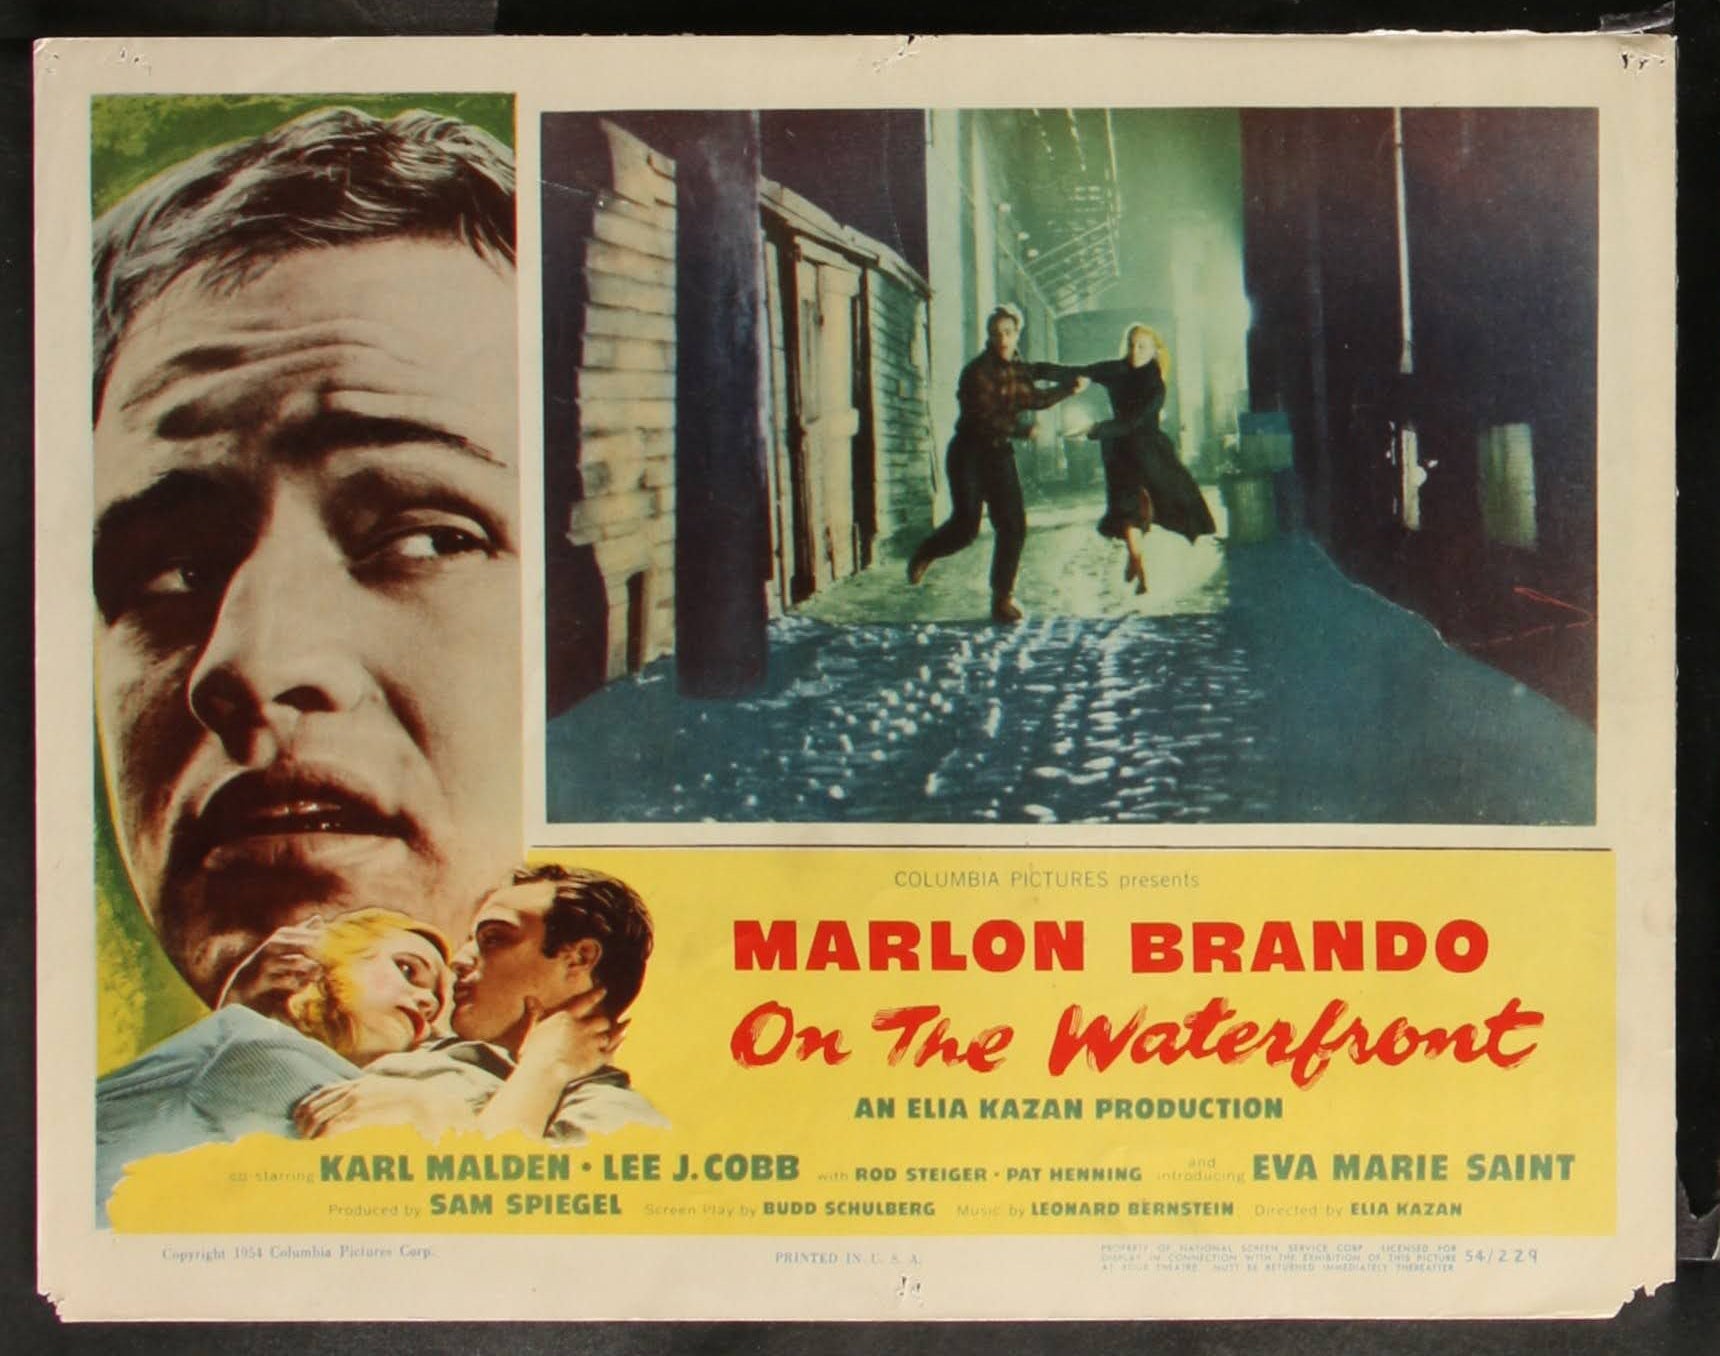 On The Waterfront US Lobby Card (1954) - ORIGINAL RELEASE - posterpalace.com